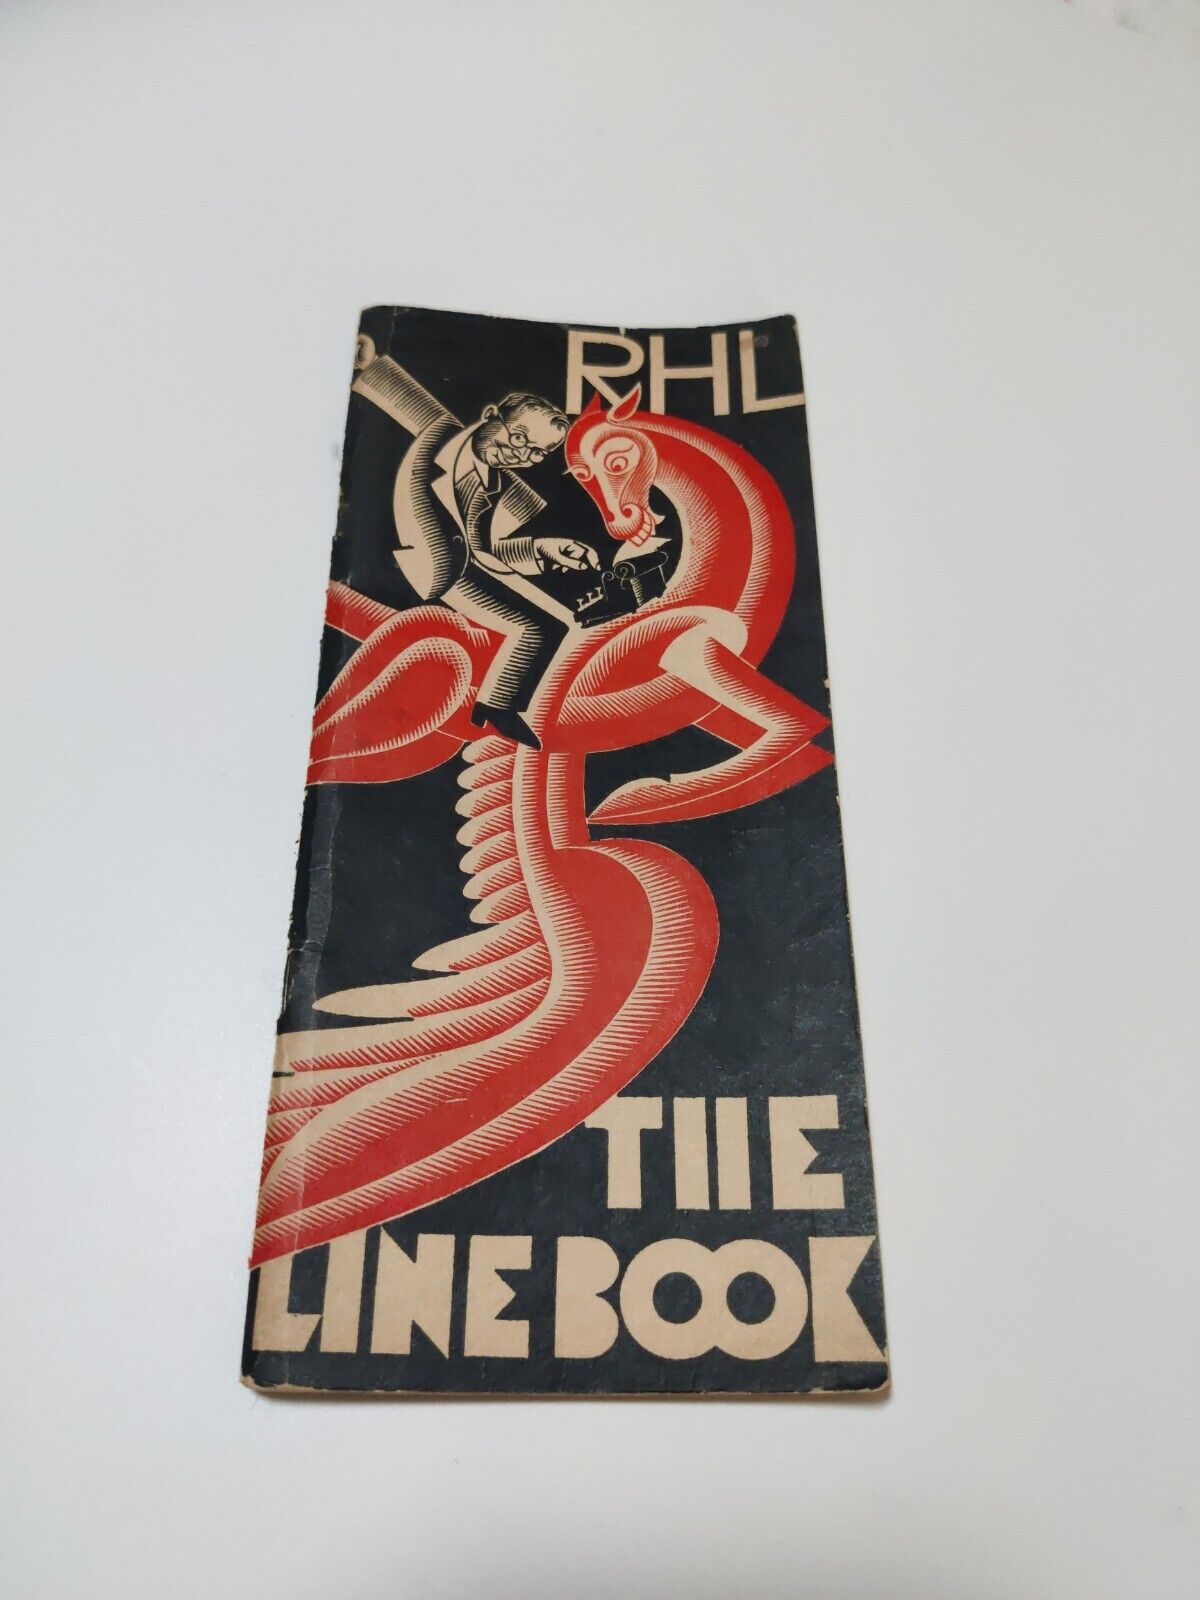 1929 Chicago Tribune\'s THE LINEBOOK by Richard Henry Little R.H.L. 